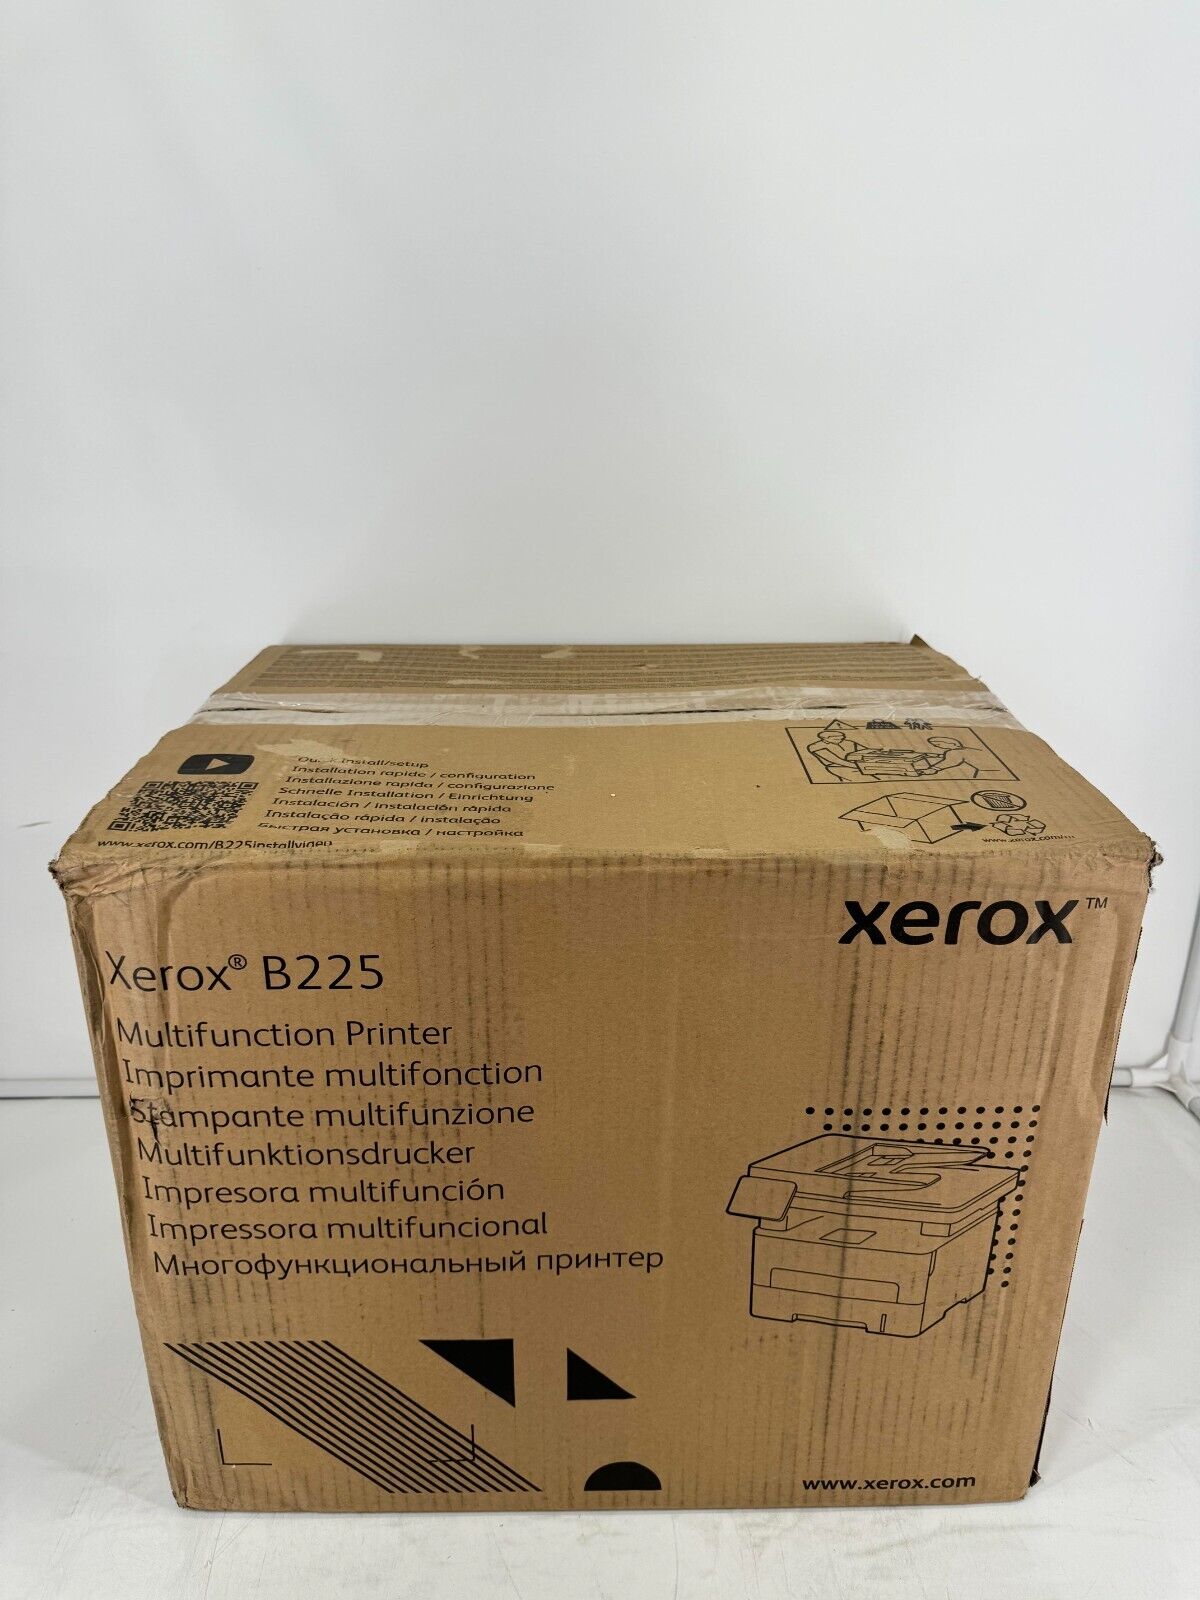 Xerox B225 Monochrome Laser All-in-One Printer B225/DNI - Total 14 Pages Printed